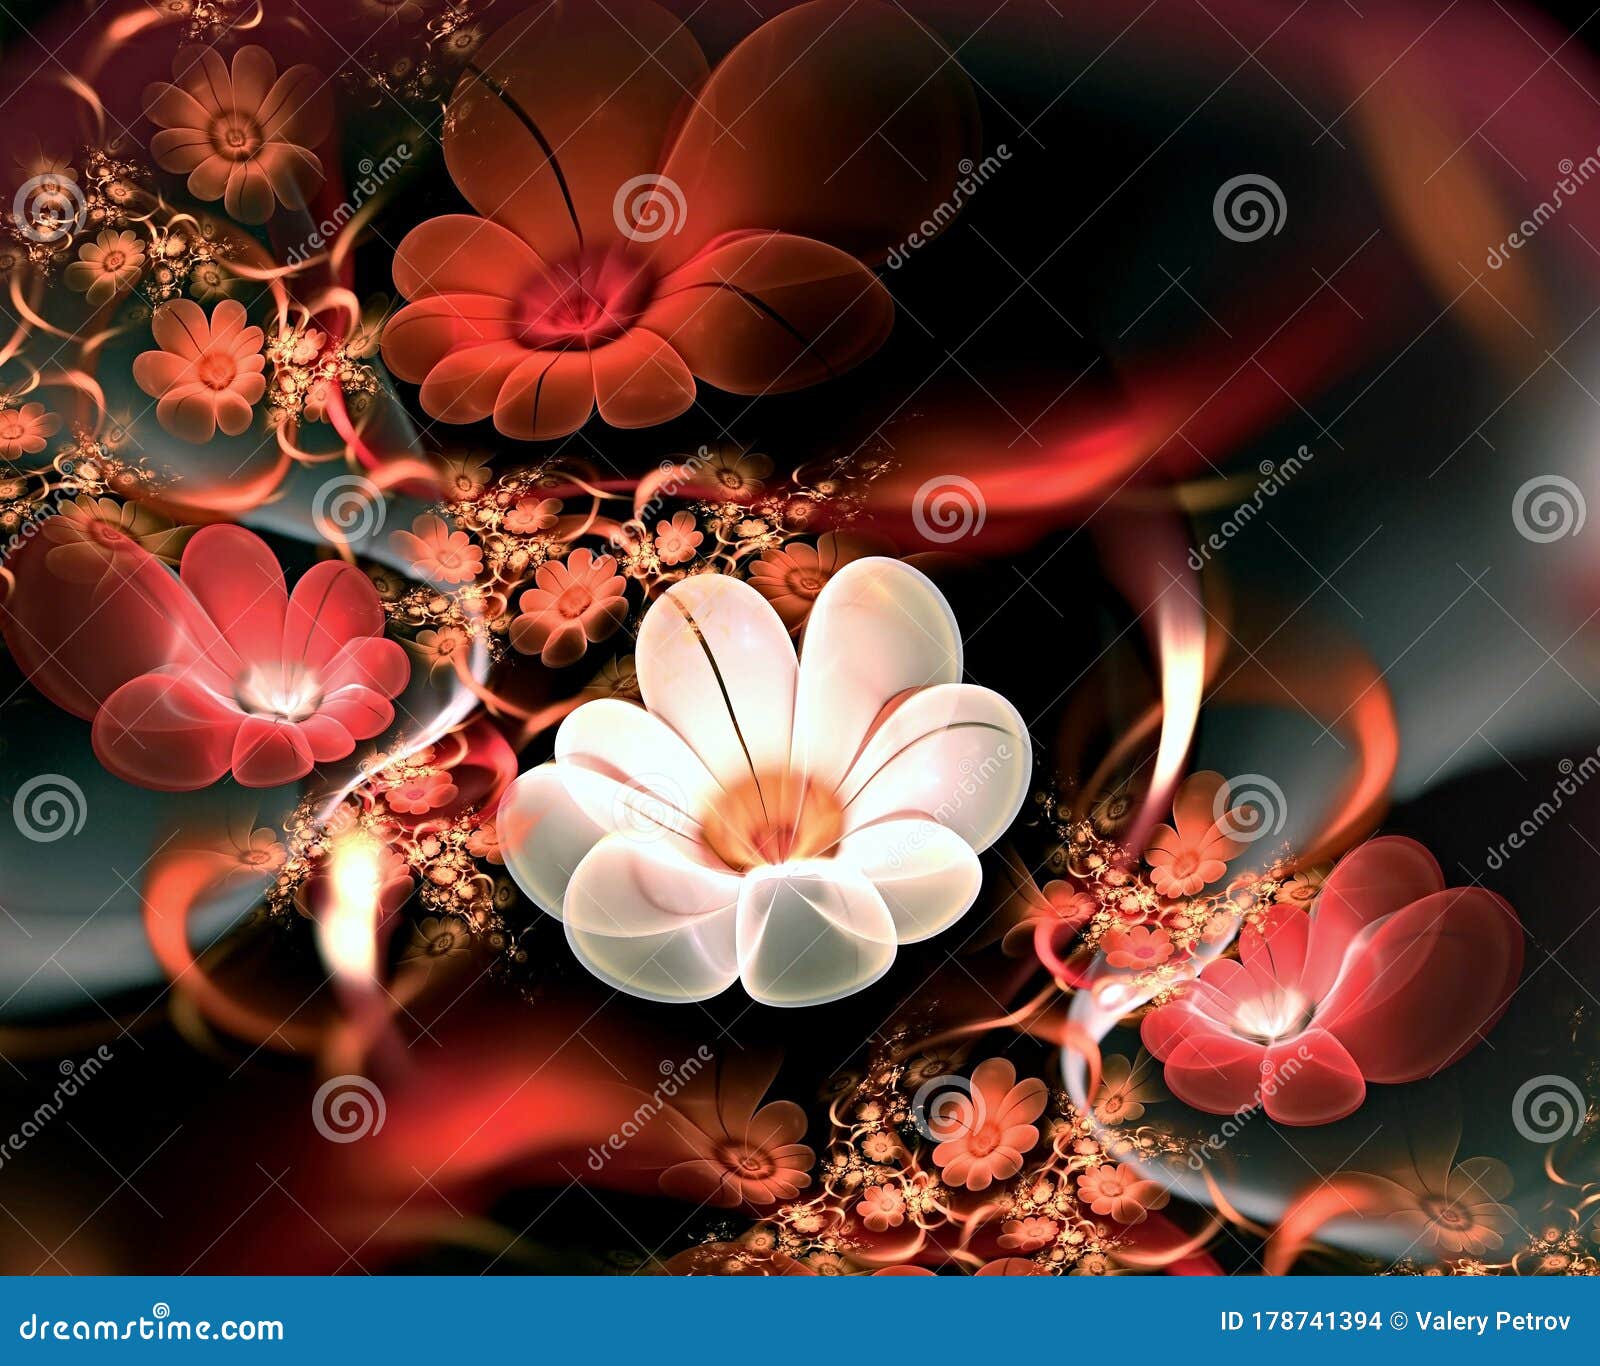 Abstract Fractal 3d Flowers on a Dark Background. Multi-colored Fractal  Image Stock Illustration - Illustration of magic, background: 178741394